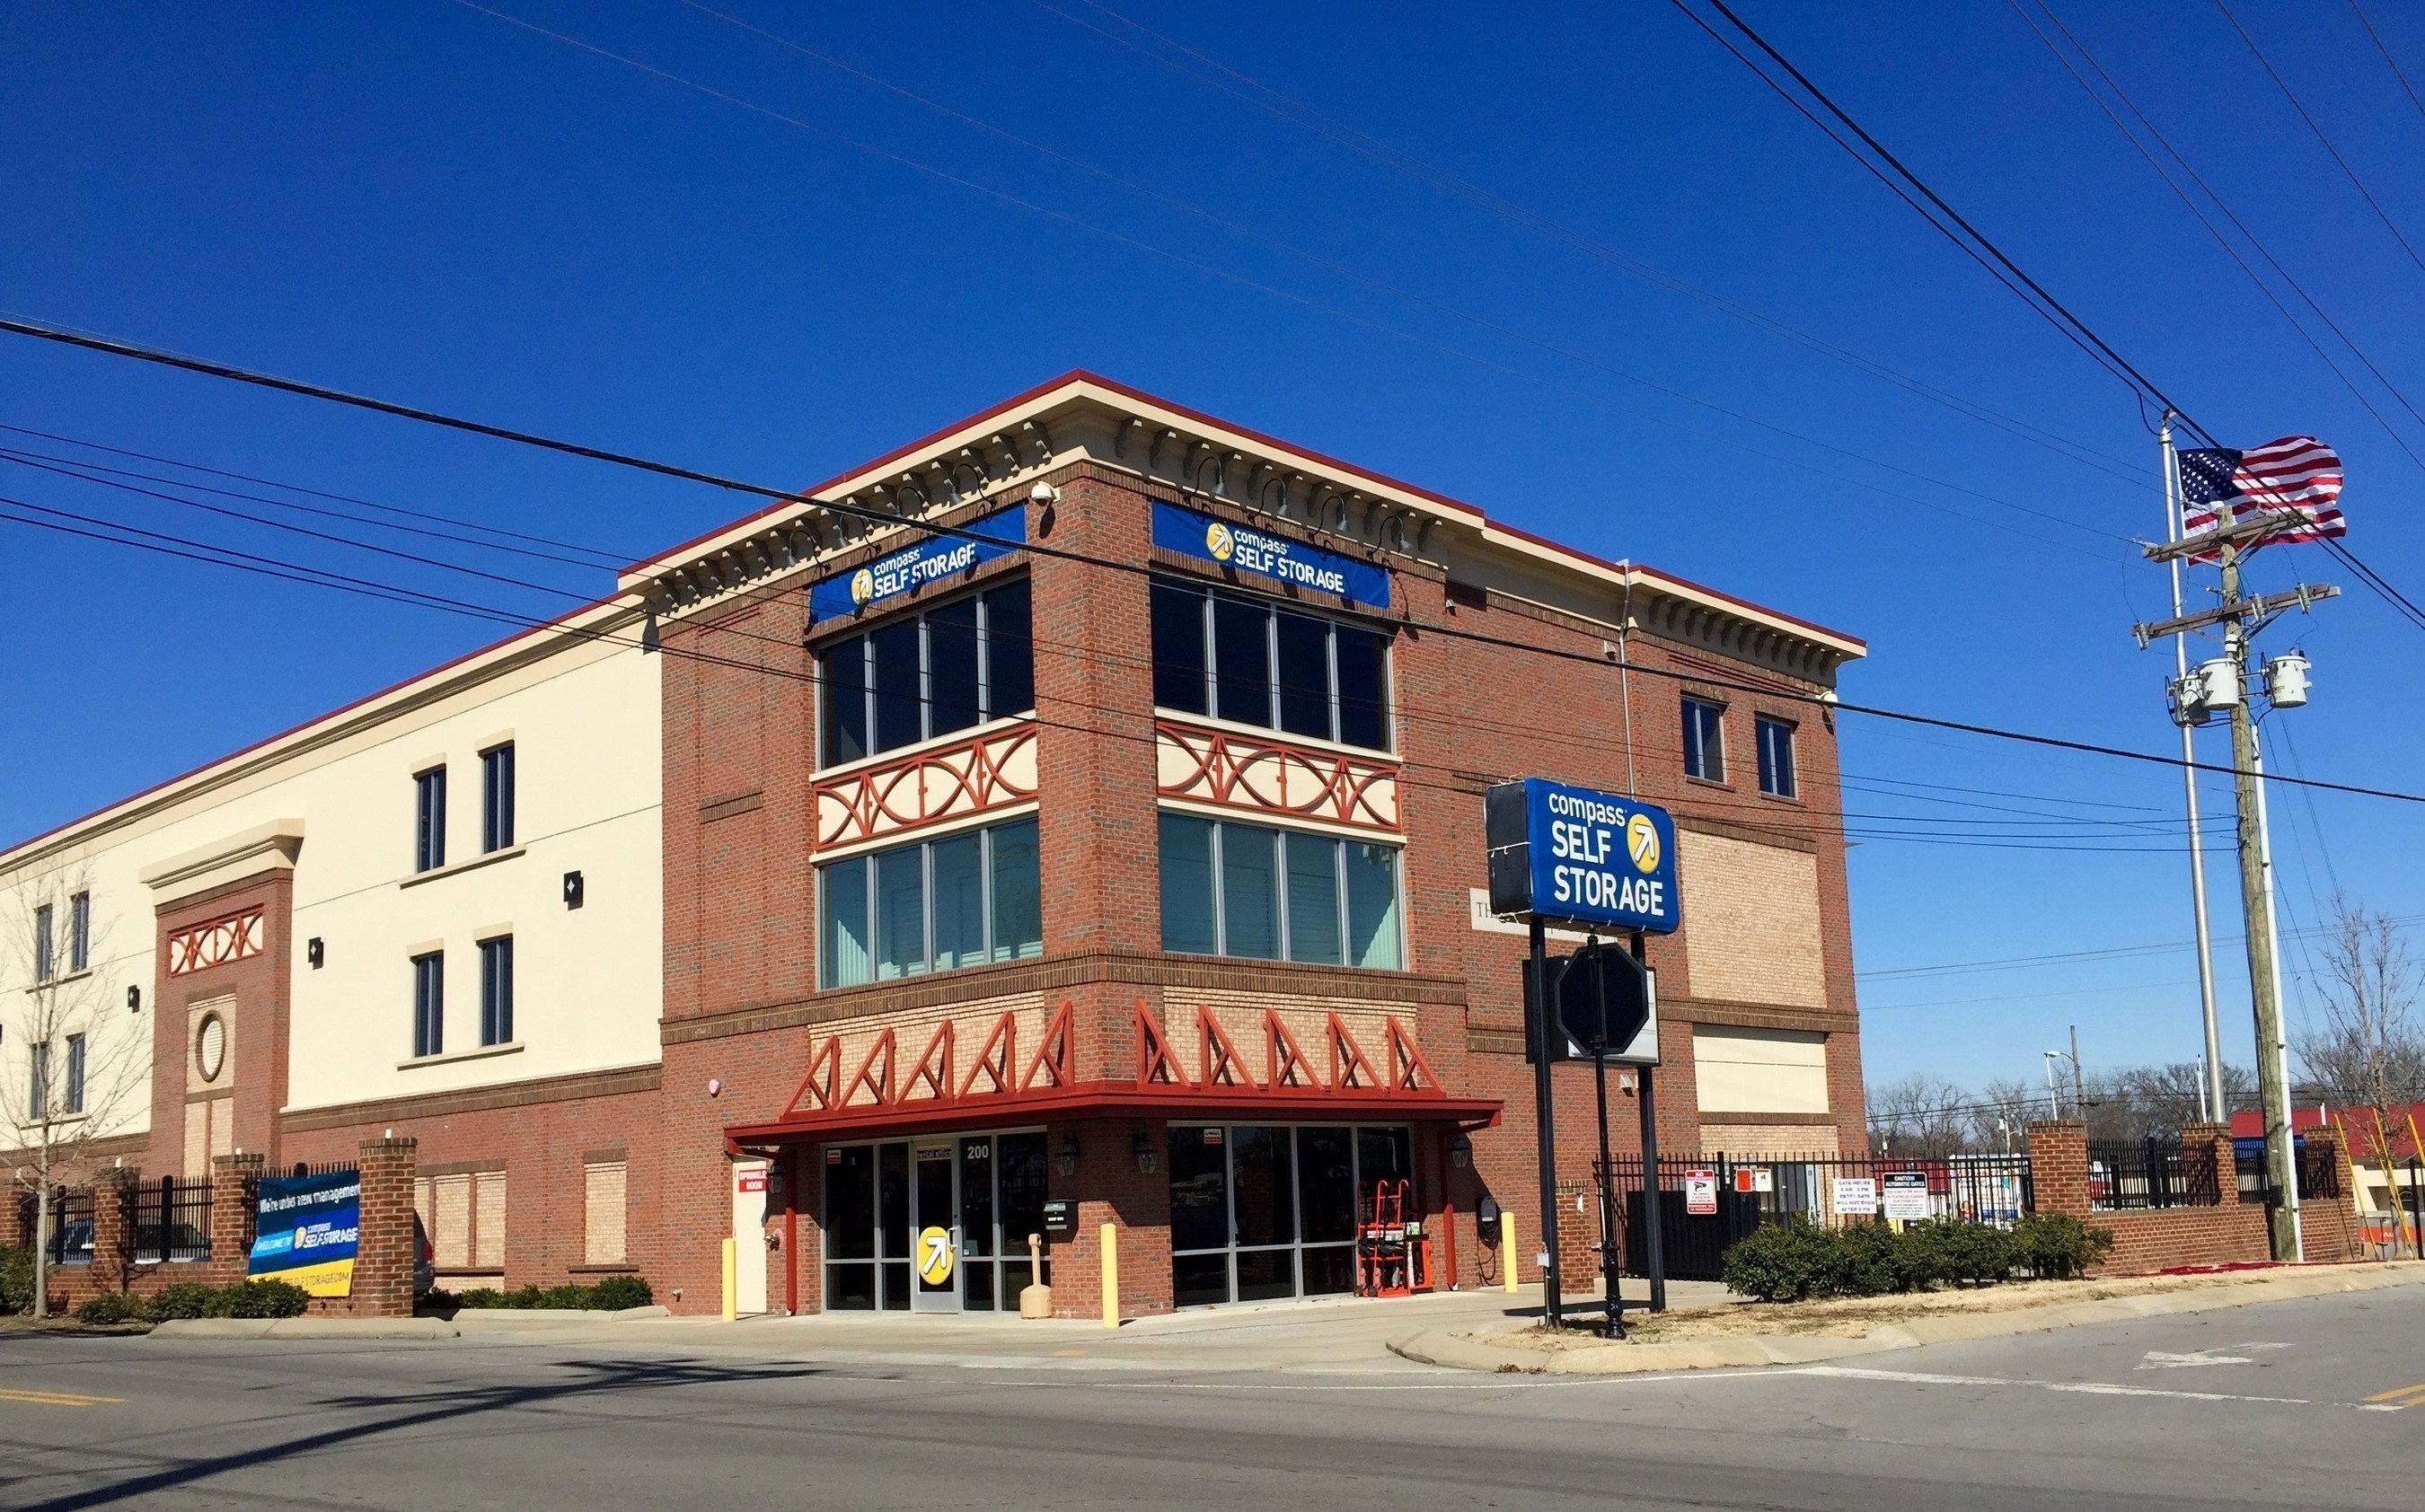 Compass Self Storage Enters the Nashville Market with Acquisition of Four Self Storage Centers.